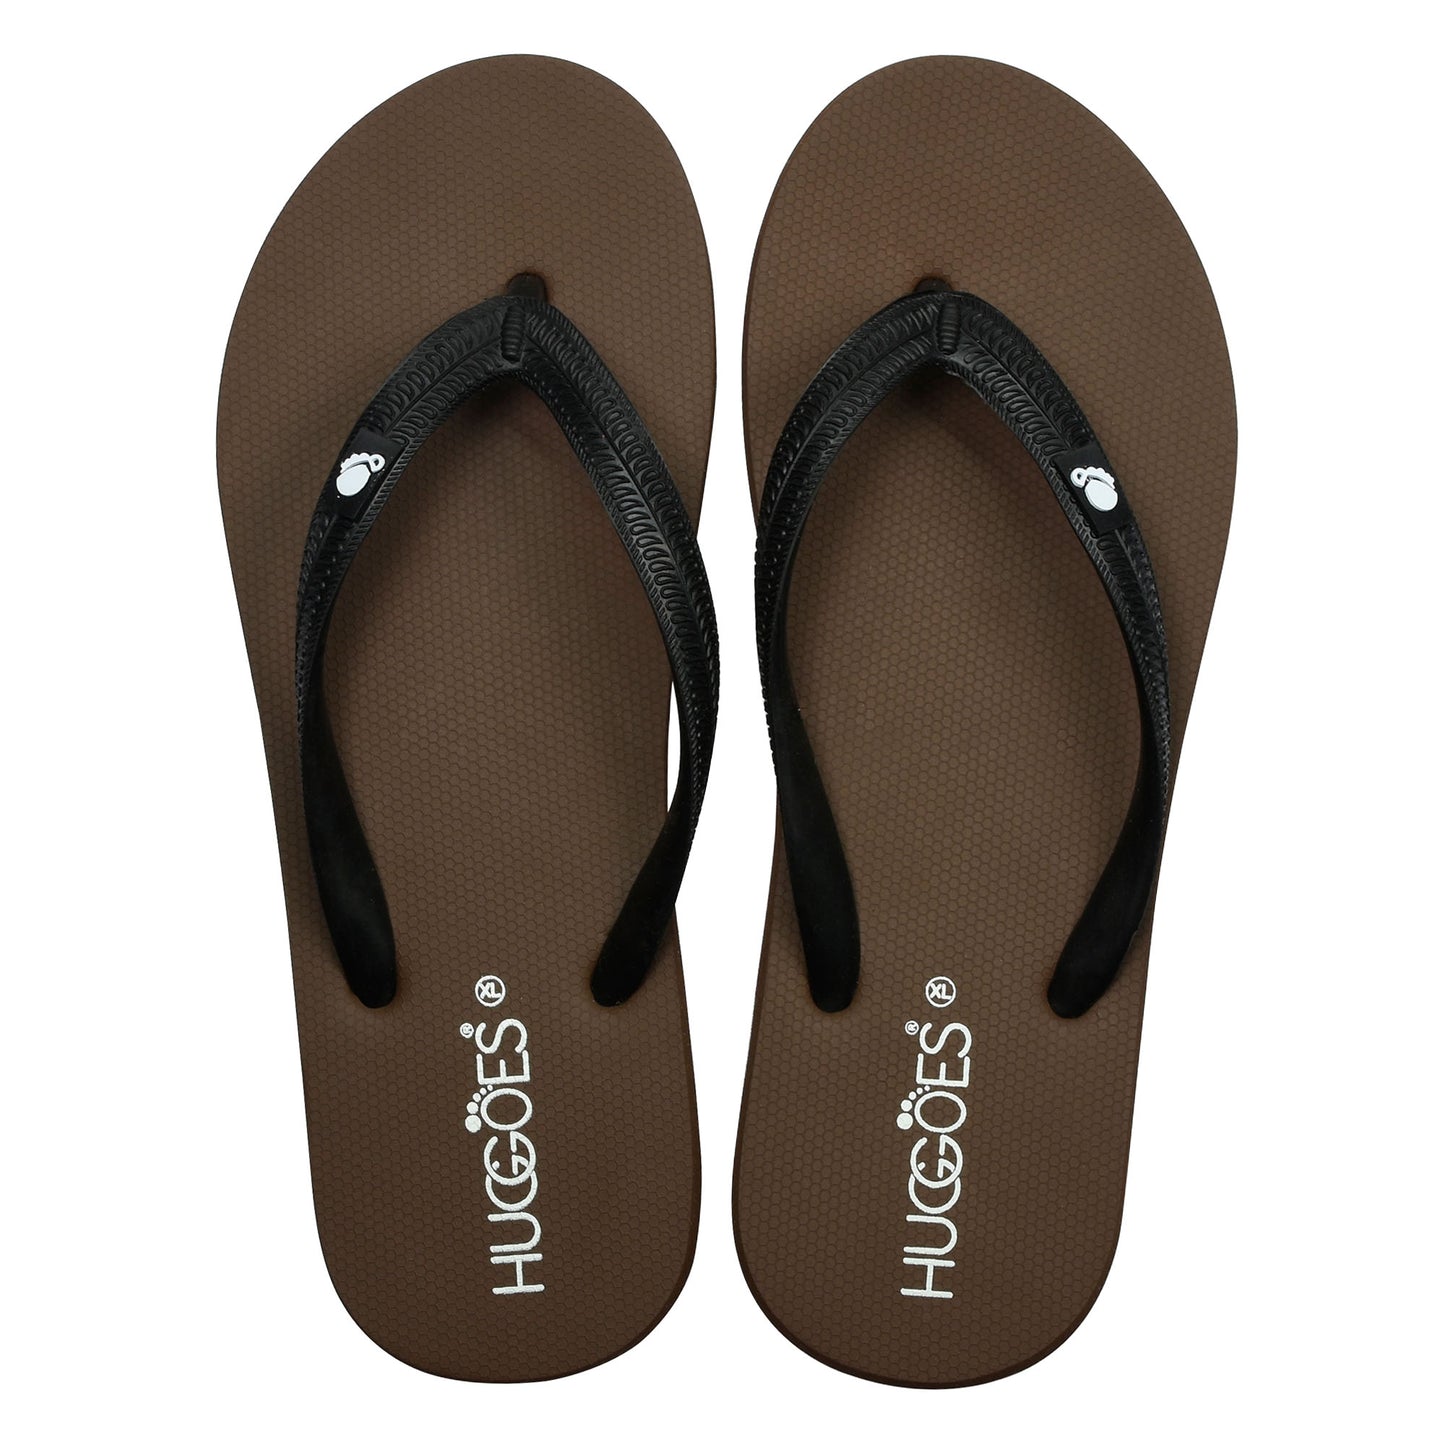 Huggoes by Aerothotic - Earthy Unisex Flip Flops Slippers - Original Thailand Imported - (BR1)